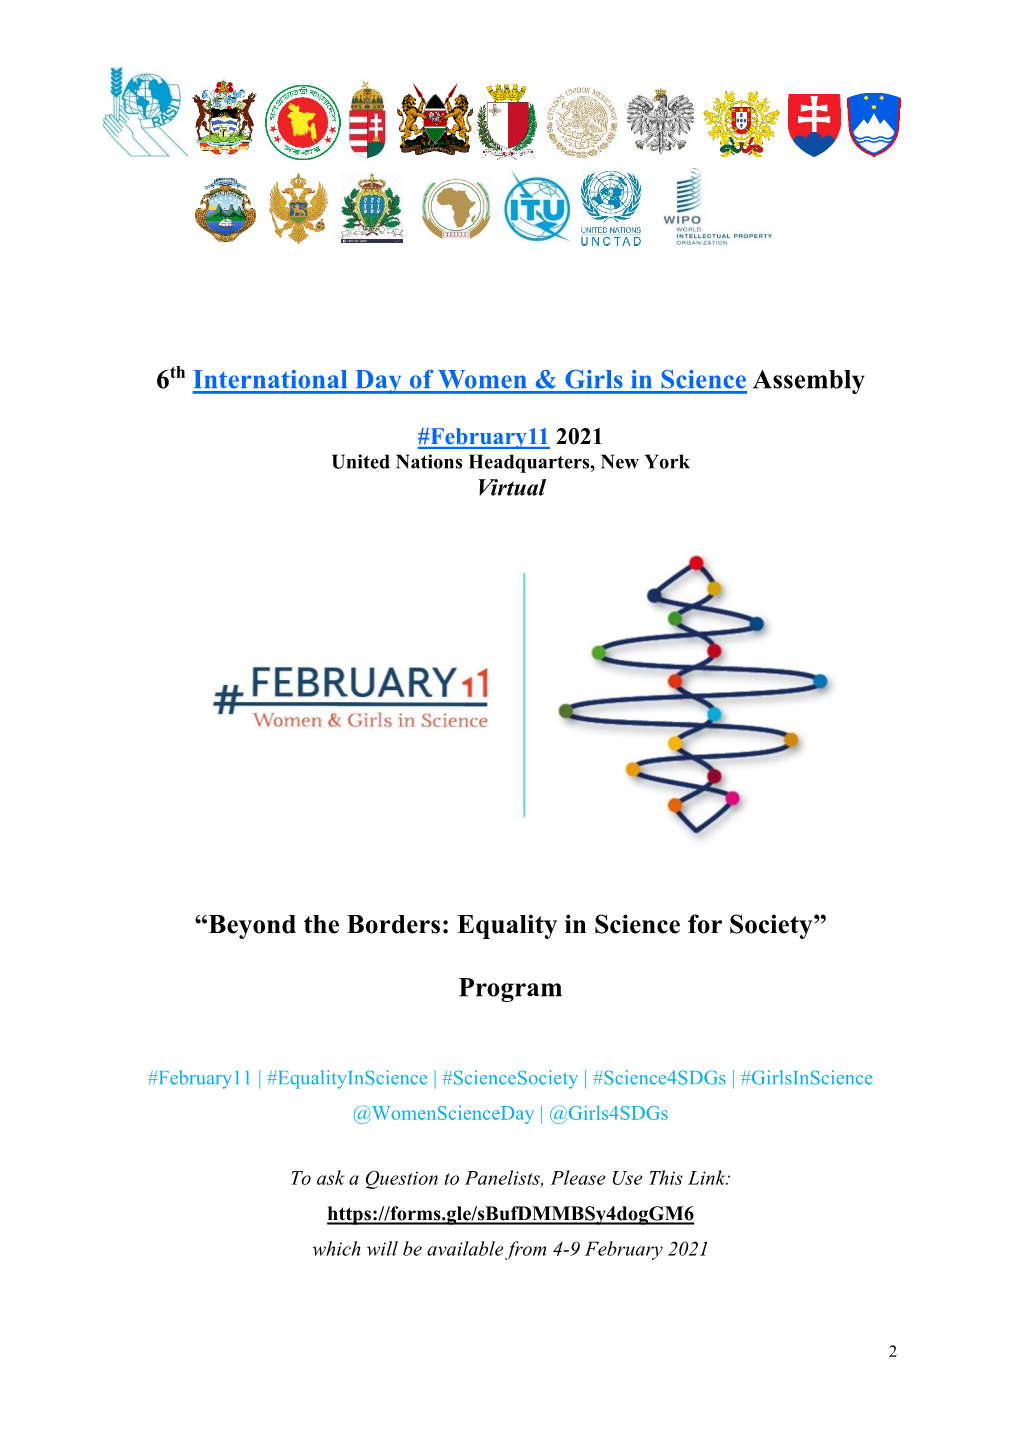 6Th International Day of Women & Girls in Science Assembly “Beyond the Borders: Equality in Science for Society” Program